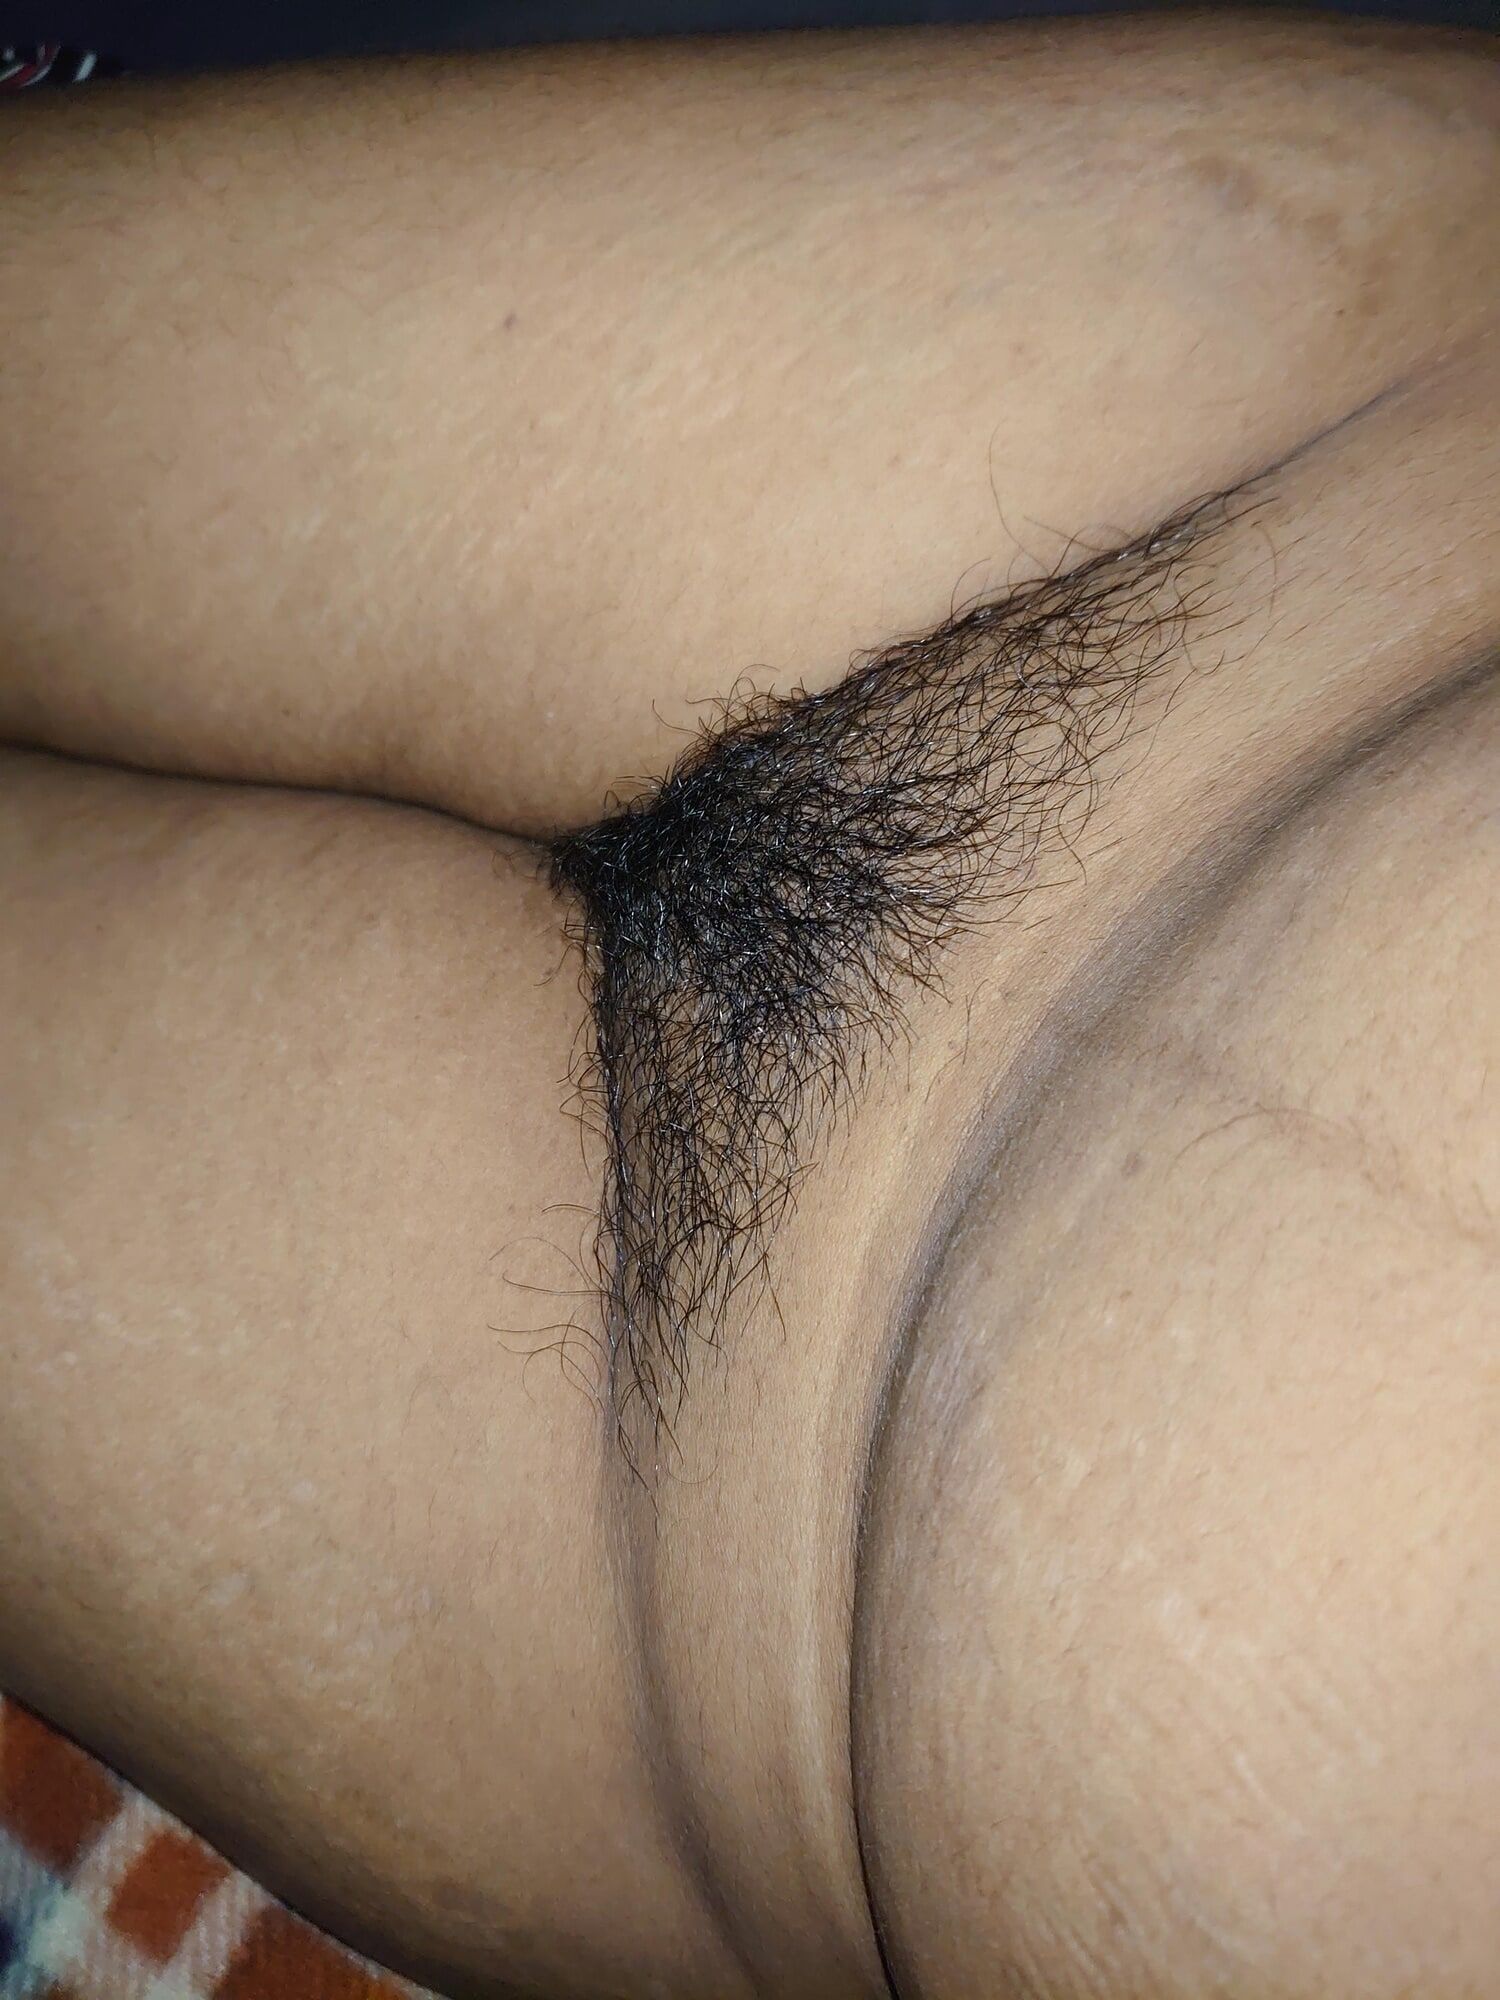 Sri Lankan MILF Sexy Ass And Hairy Pussy #2